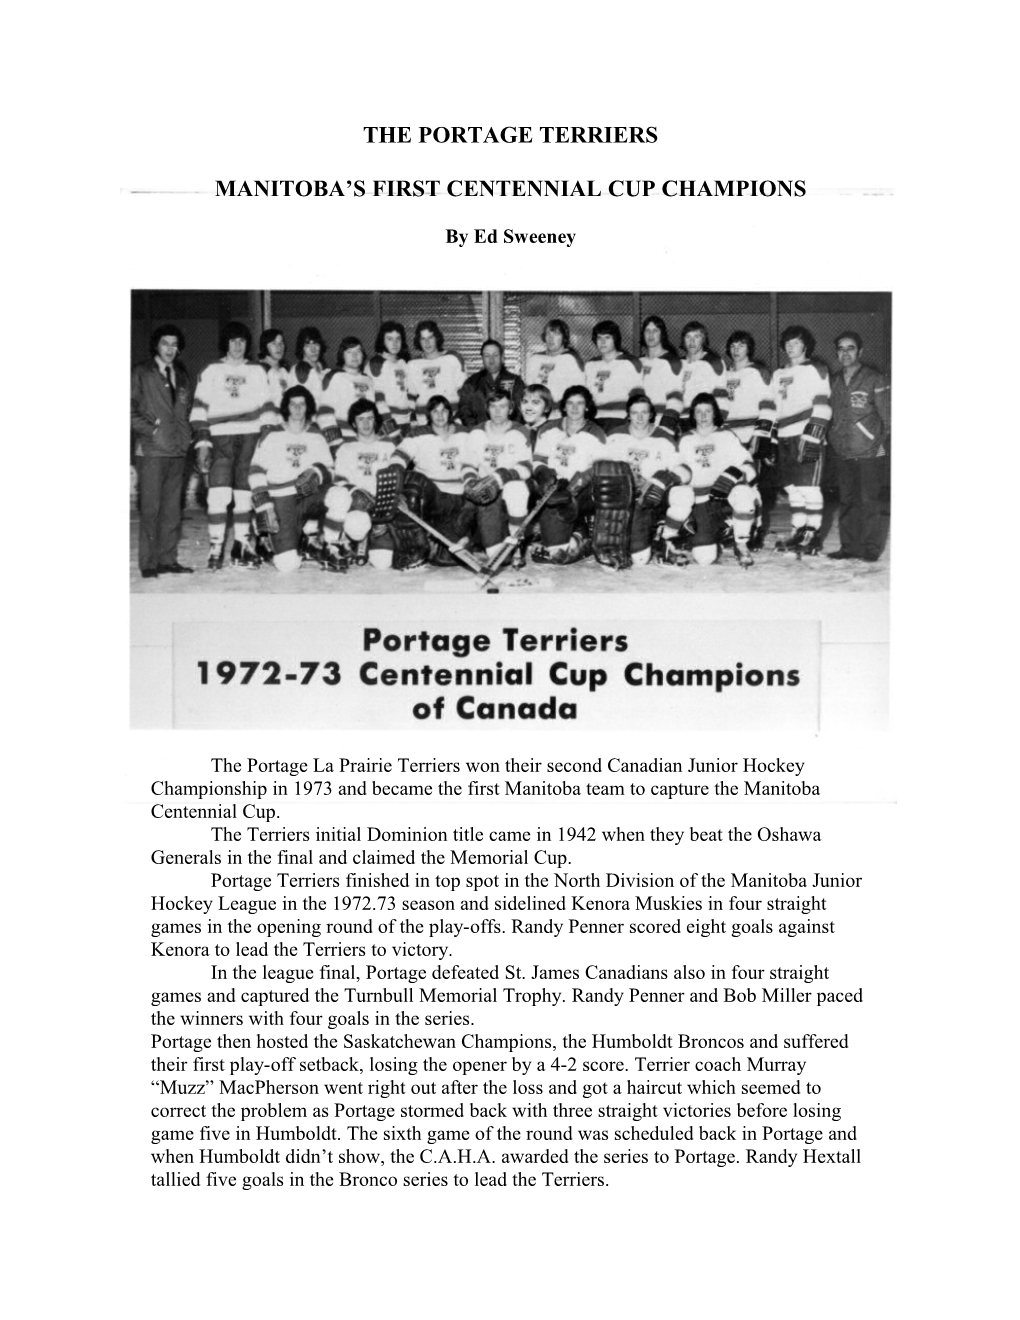 The Portage Terriers